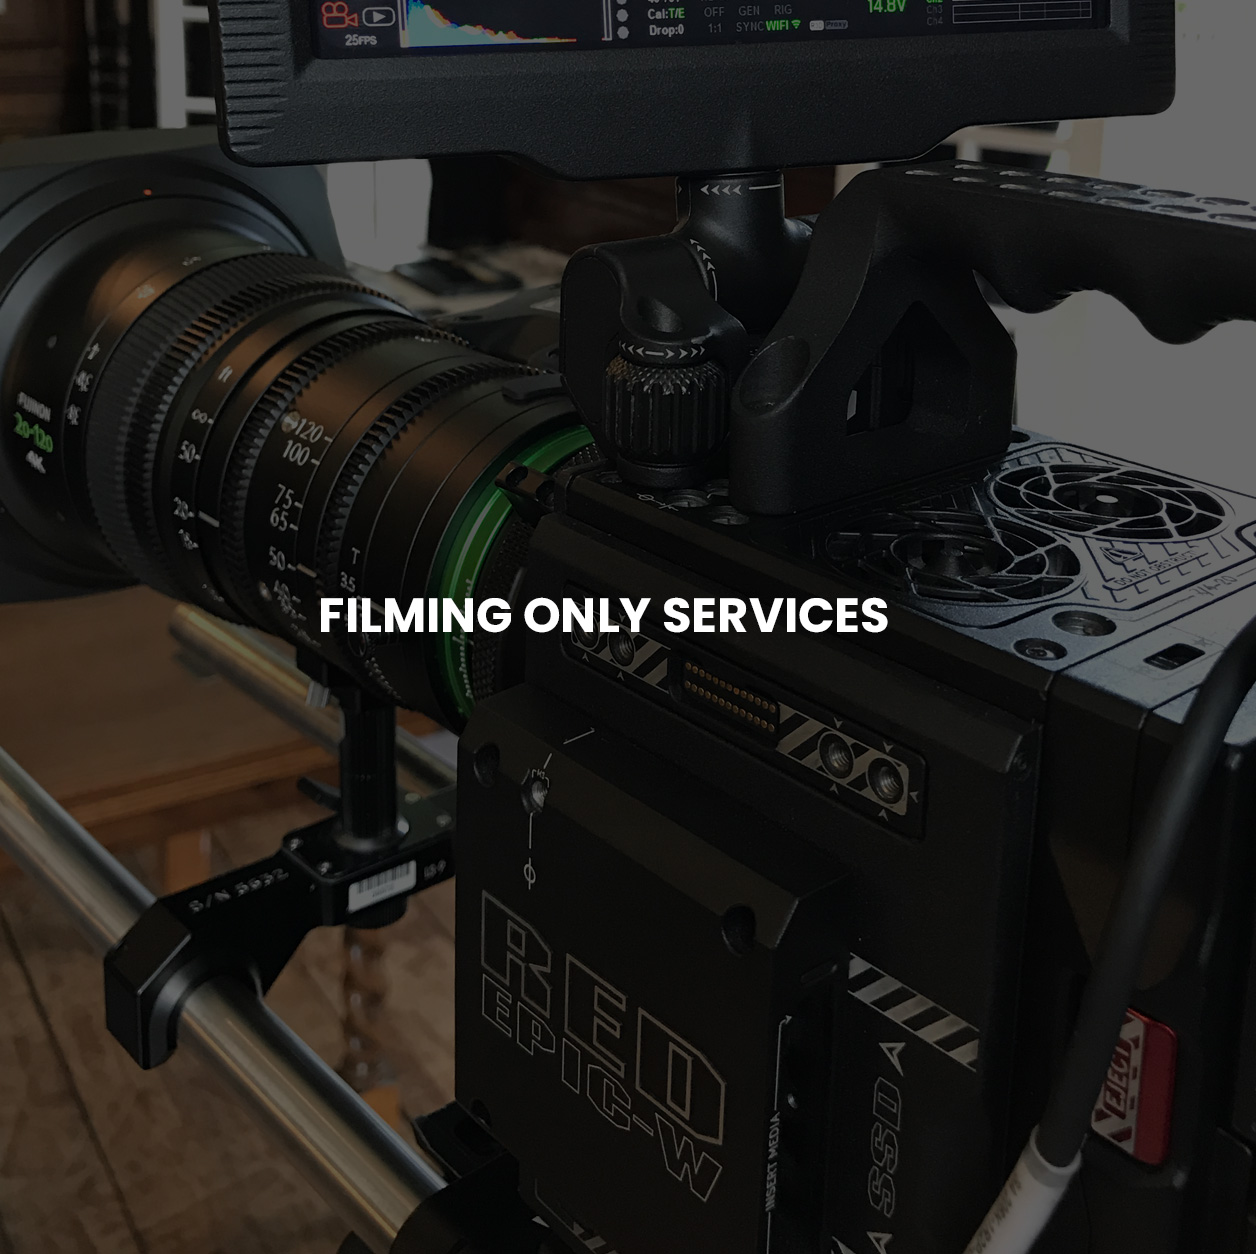 Filming Only Services